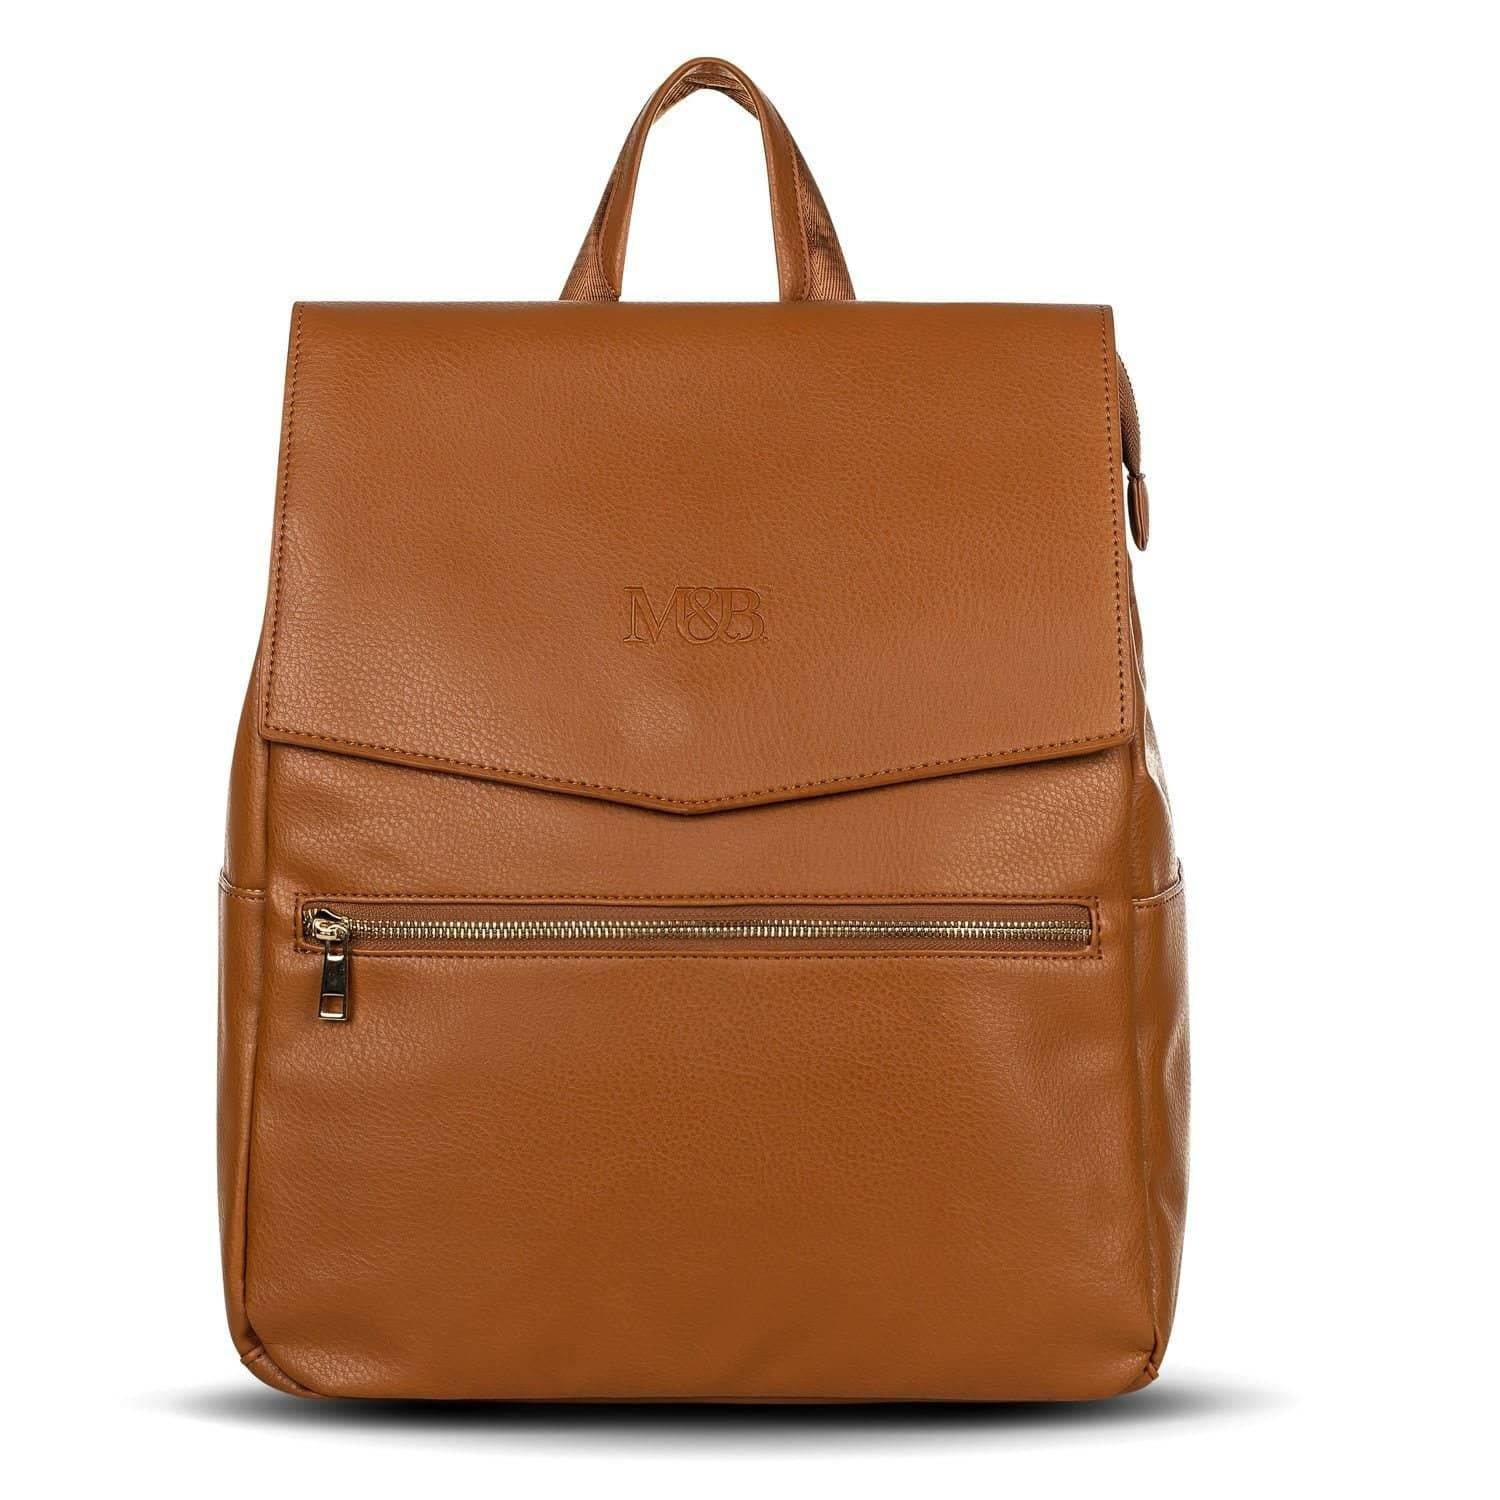 Scarlett - Luxury Baby Bag | Caramel Faux Leather Baby Backpack